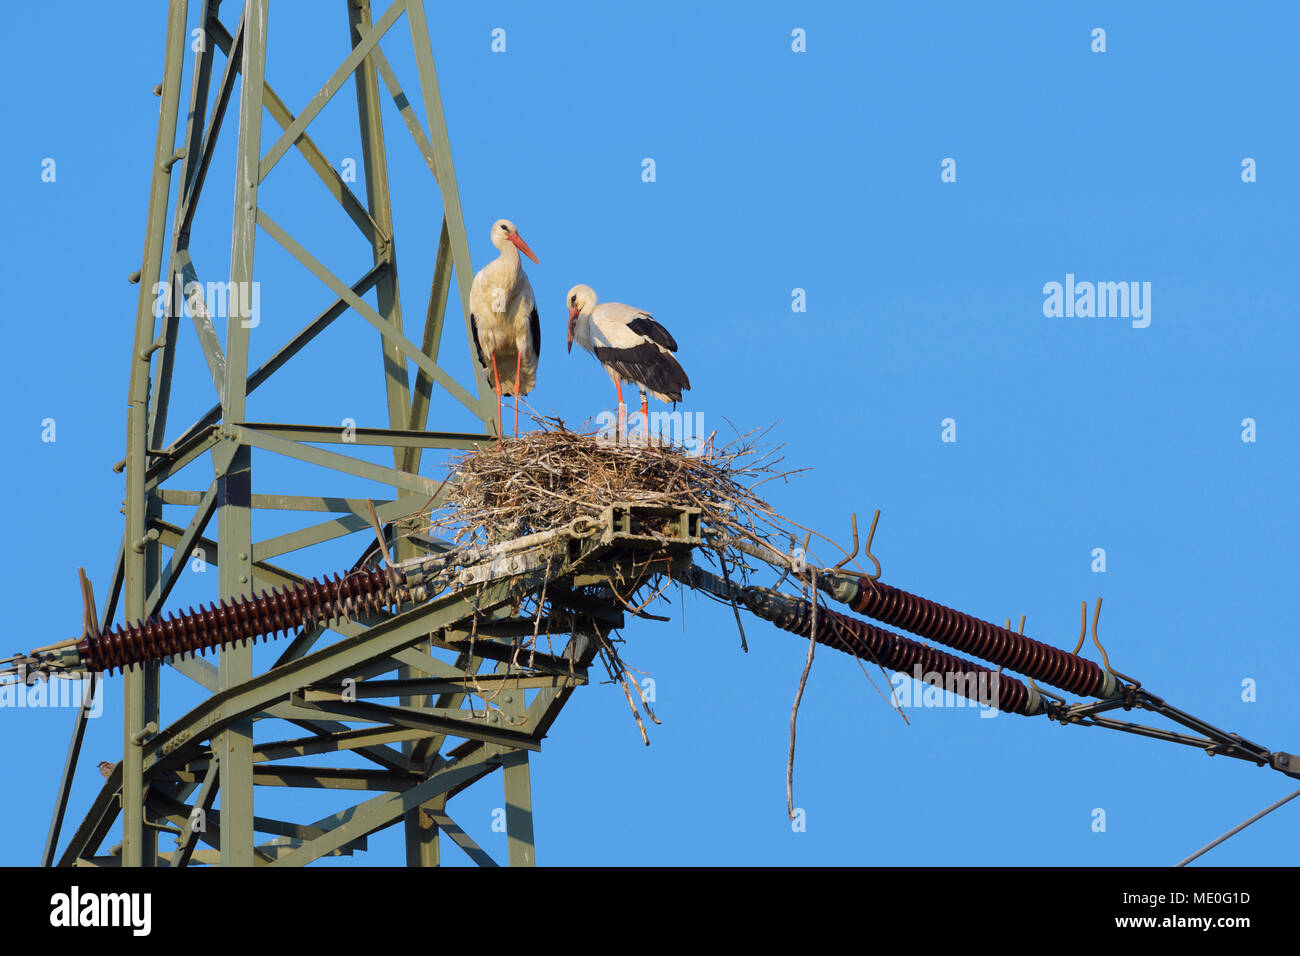 Two white storks (Ciconia ciconia) standing in nest on top of electricity pylon against a blue sky in Hesse, Germany Stock Photo